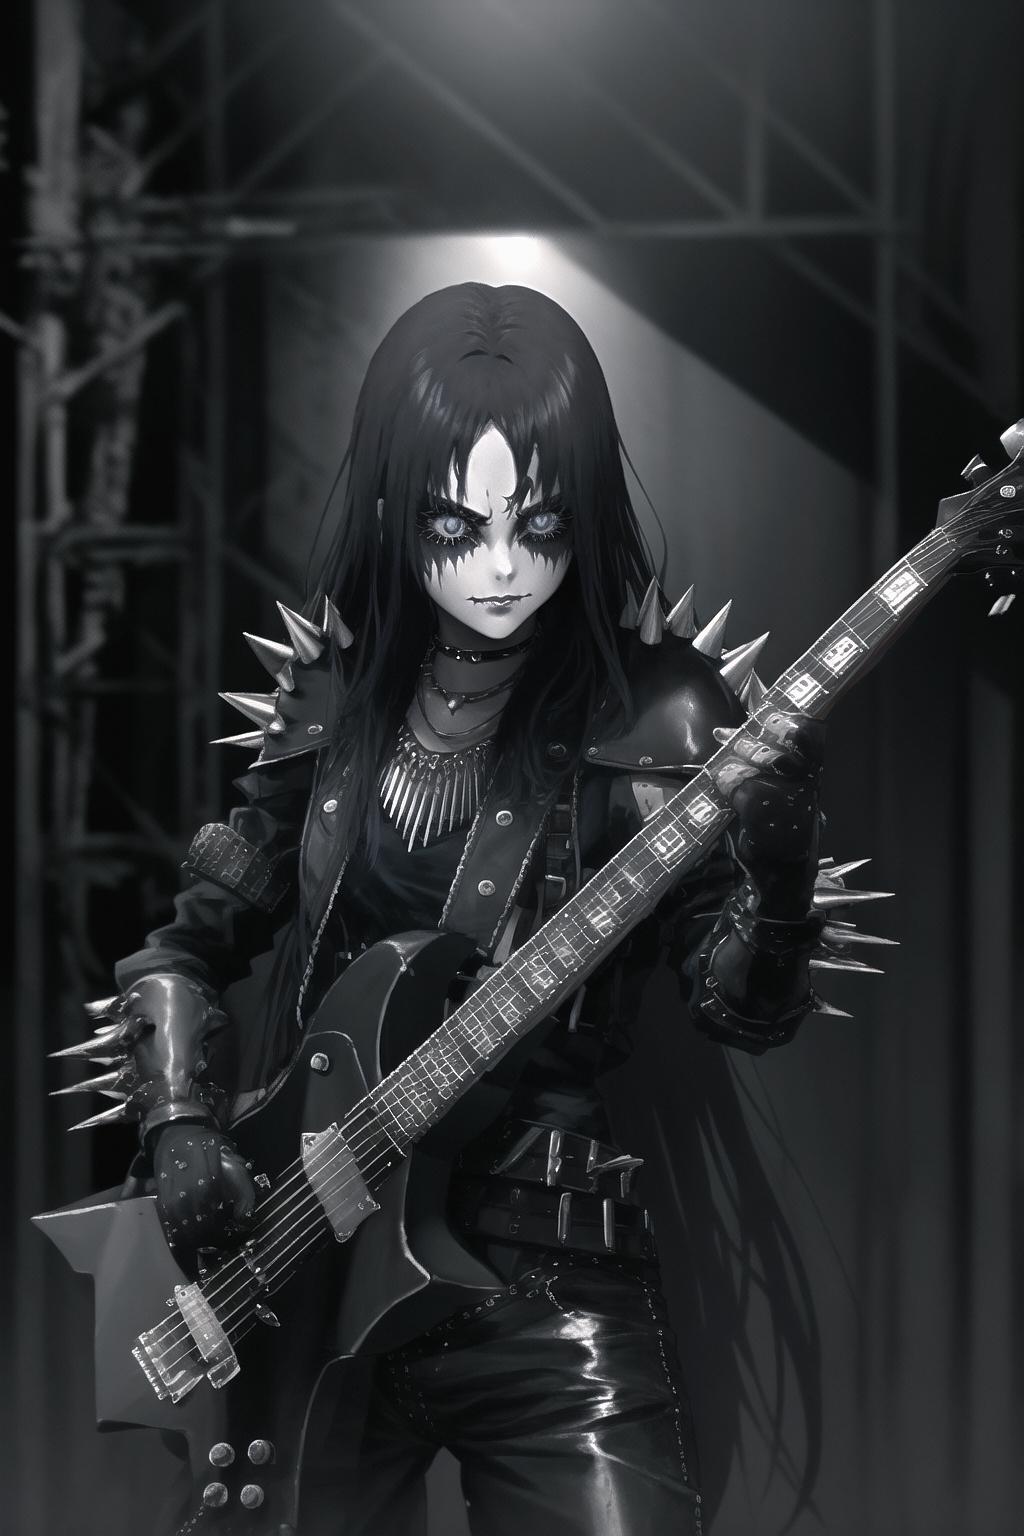 Do anime art in black metal style by Desolate_afd | Fiverr